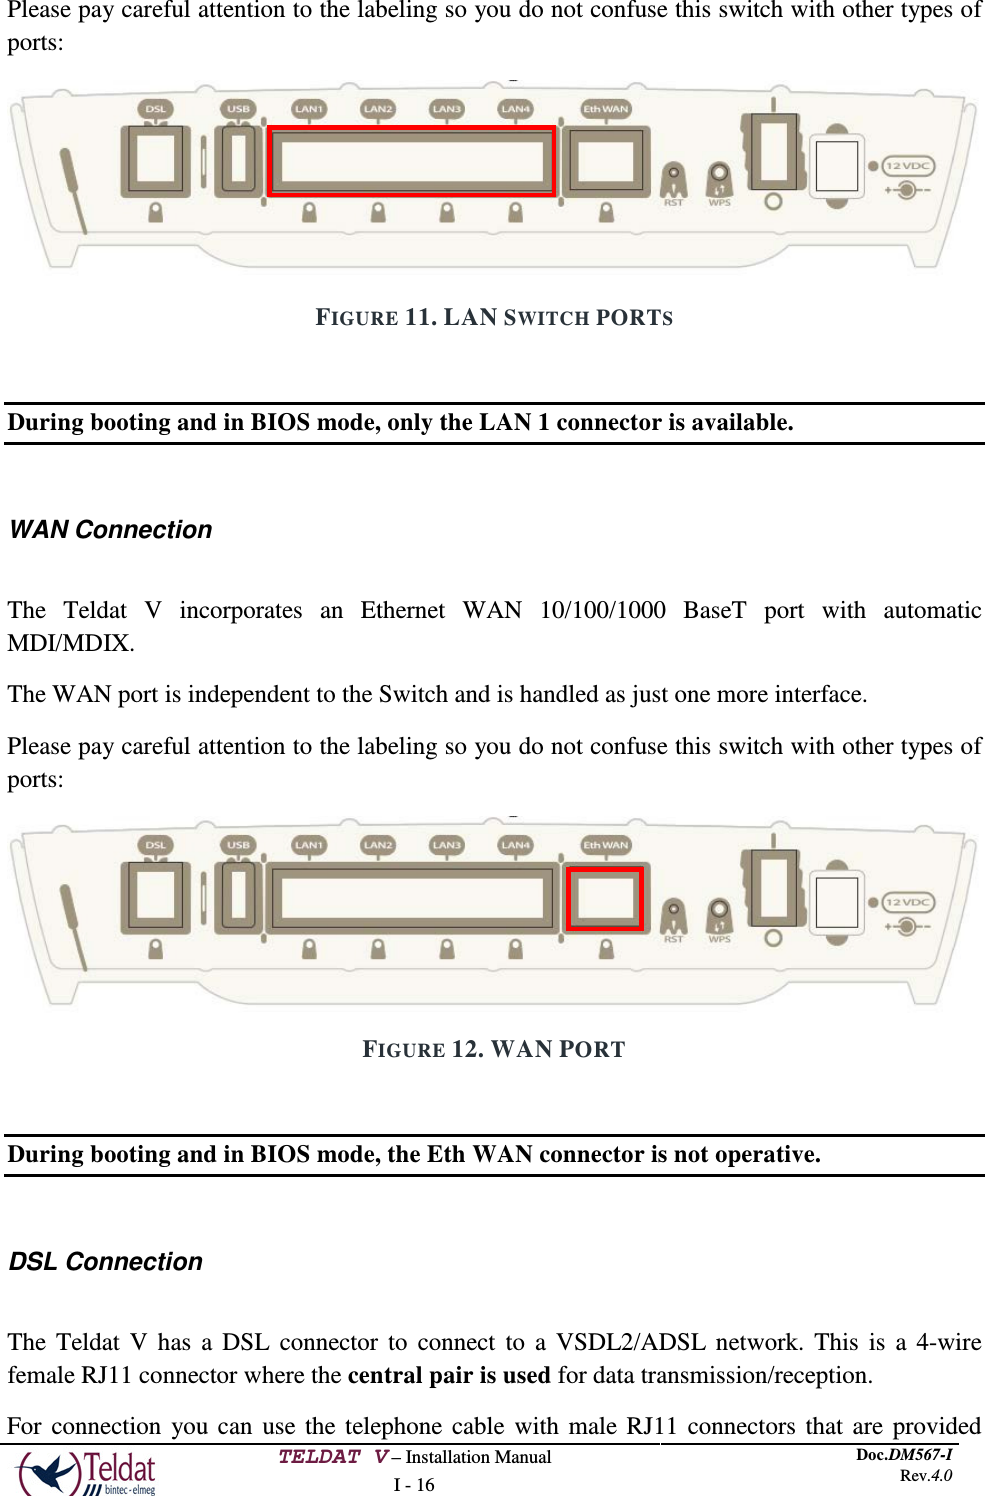  TELDAT V – Installation Manual I - 16 Doc.DM567-I Rev.4.0  Please pay careful attention to the labeling so you do not confuse this switch with other types of ports:  FIGURE 11. LAN SWITCH PORTS  During booting and in BIOS mode, only the LAN 1 connector is available.  WAN Connection  The Teldat V incorporates an Ethernet WAN 10/100/1000 BaseT port with automatic MDI/MDIX. The WAN port is independent to the Switch and is handled as just one more interface. Please pay careful attention to the labeling so you do not confuse this switch with other types of ports:   FIGURE 12. WAN PORT  During booting and in BIOS mode, the Eth WAN connector is not operative.  DSL Connection  The Teldat V has a DSL connector to connect to a VSDL2/ADSL network. This is a 4-wire female RJ11 connector where the central pair is used for data transmission/reception. For connection you can use the telephone cable with male RJ11 connectors that are provided   